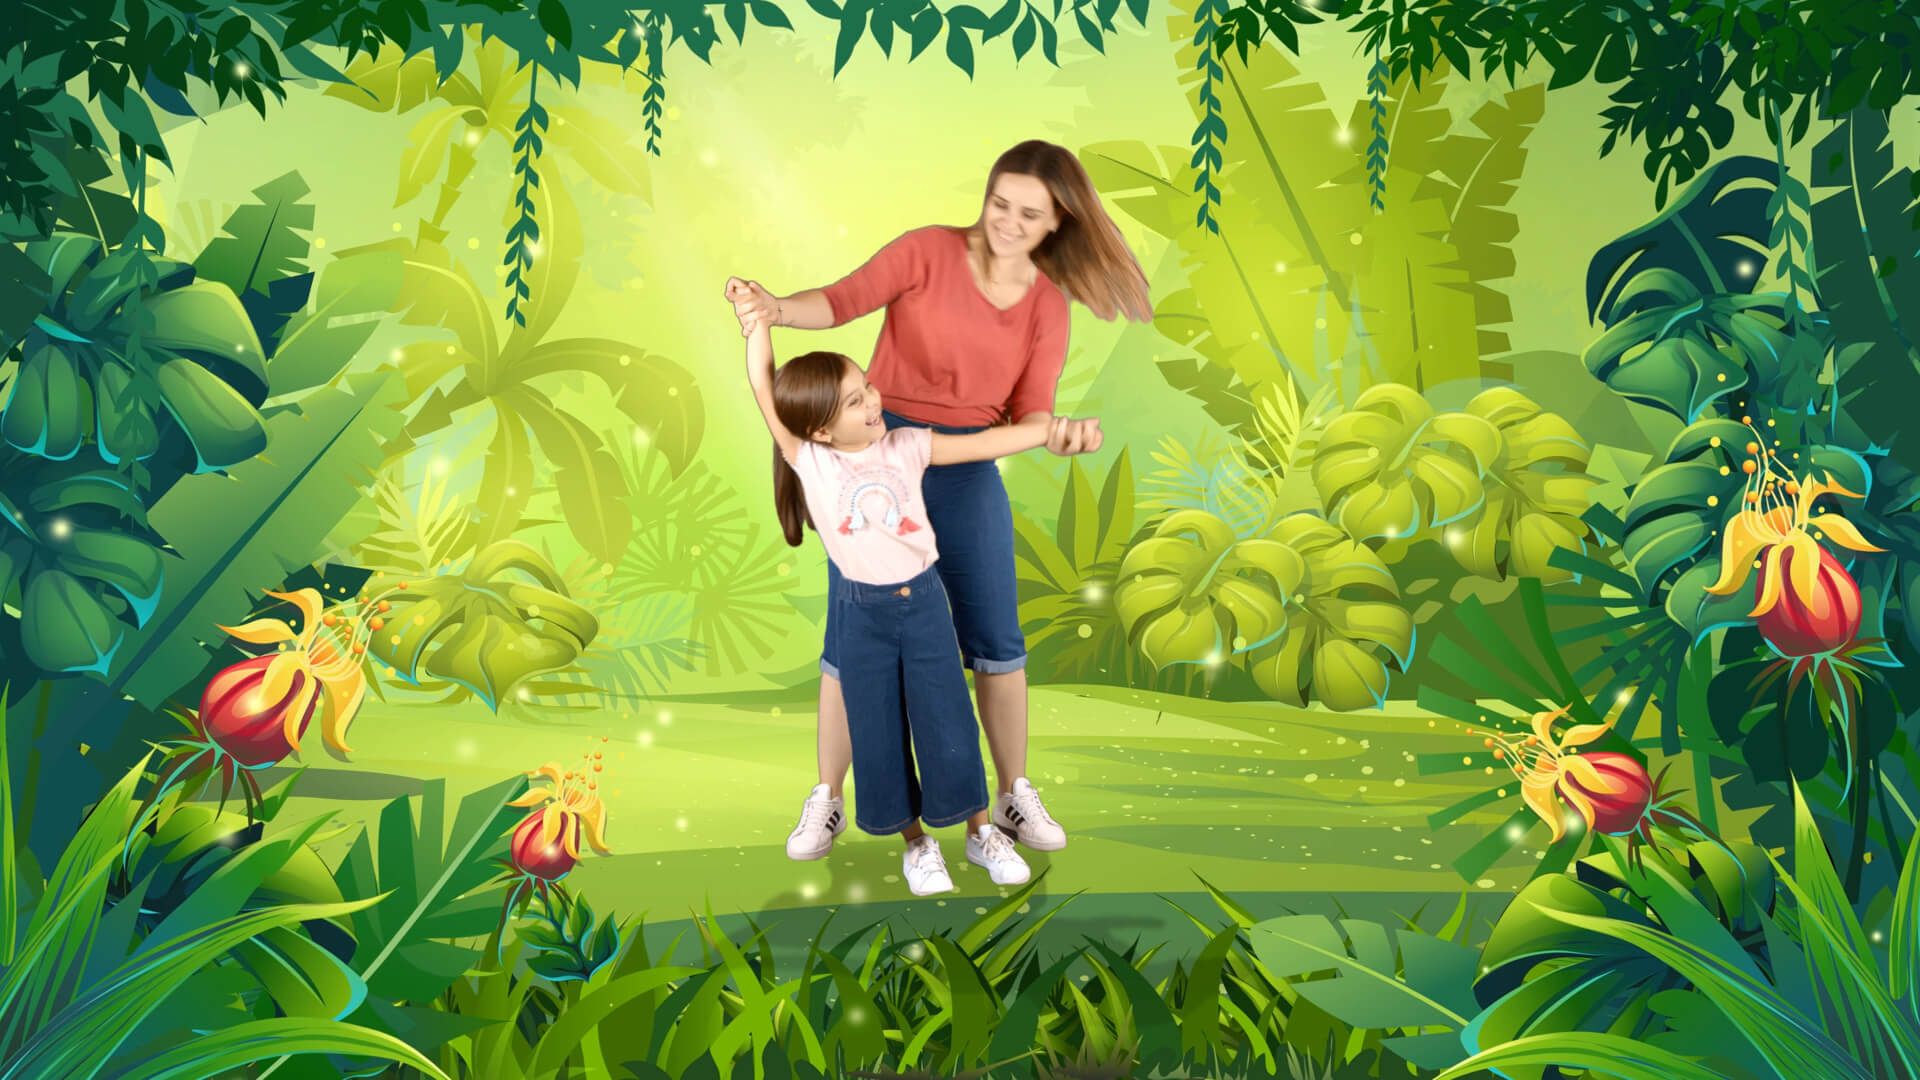 A mom and a little girl enjoying exercise in cartoon jungle